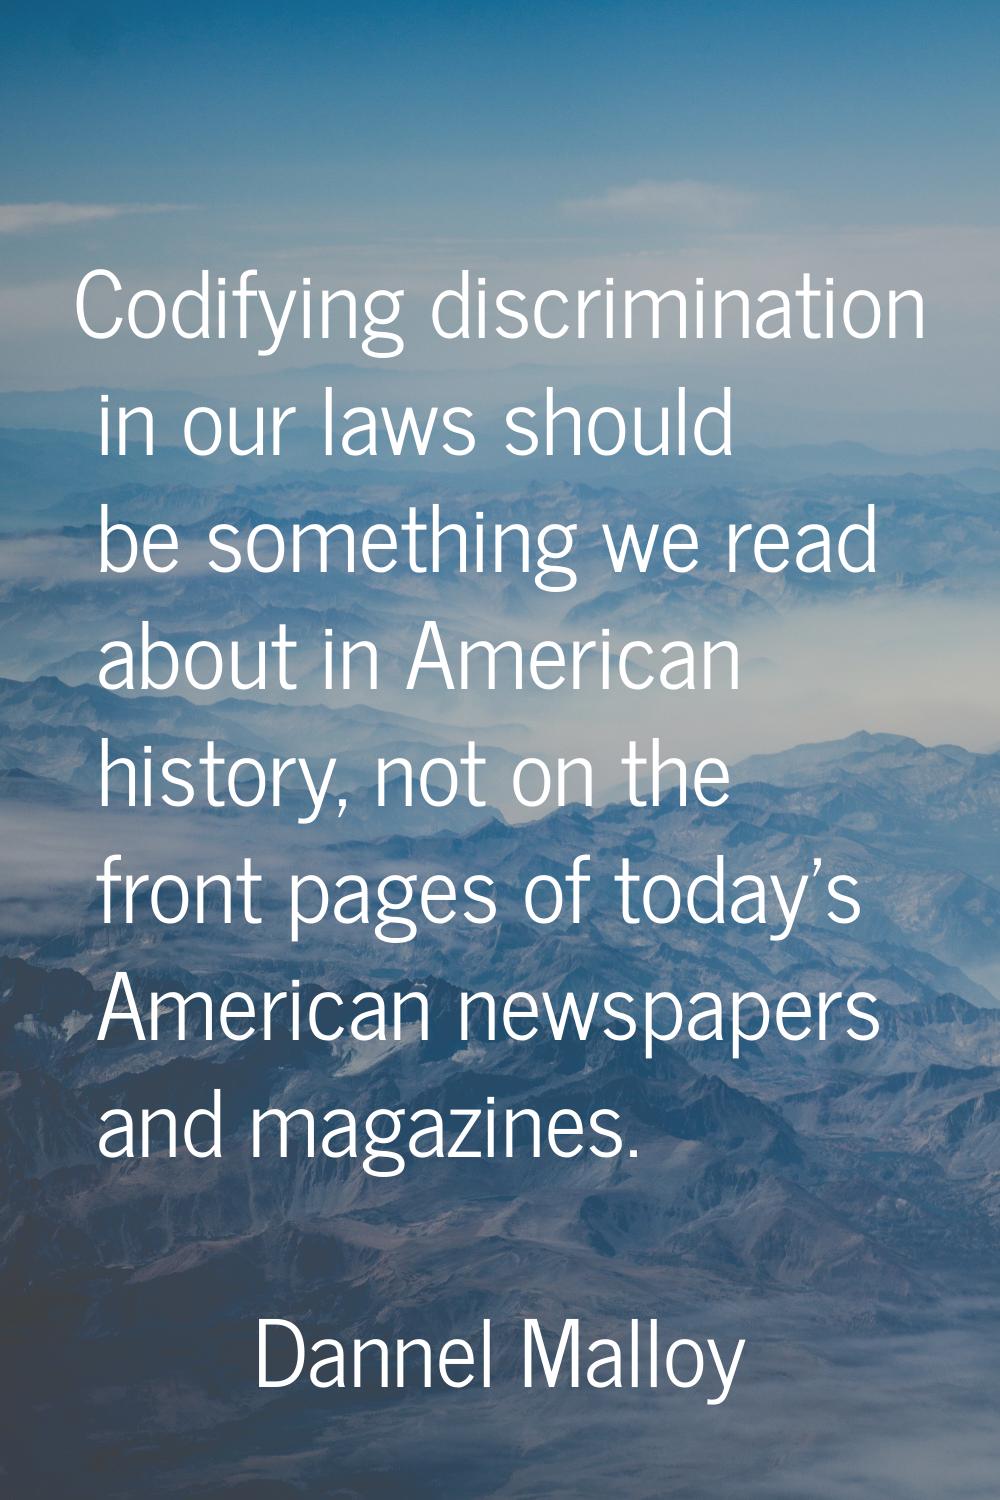 Codifying discrimination in our laws should be something we read about in American history, not on 